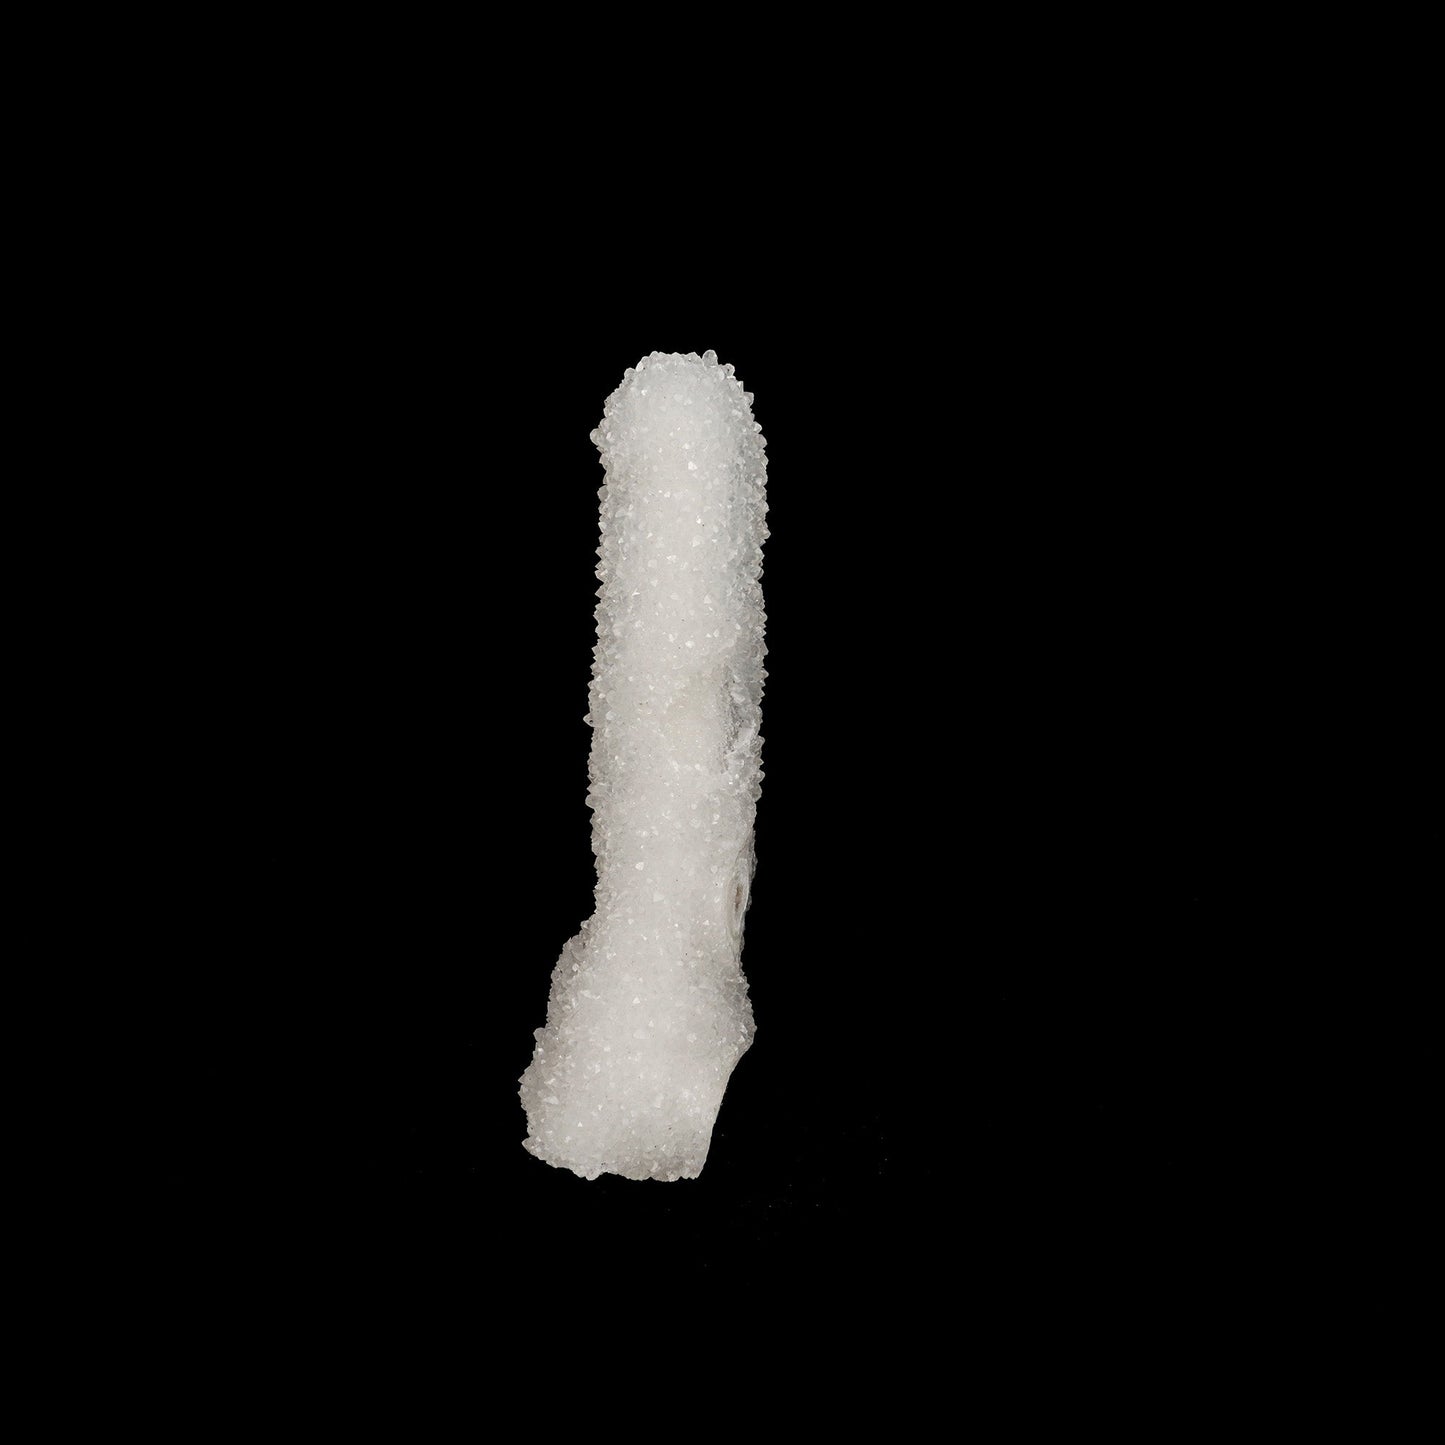 MM Quartz Sparkling Stalactite Natural Mineral Specimen # B 5252  https://www.superbminerals.us/products/mm-quartz-sparkling-stalactite-natural-mineral-specimen-b-5252  Features: A glossy, lustrous covering of Apophyllite crystals encloses bright white, microcrystalline Quartz crystals. The shiny, lustrous covering of Apophyllite crystals encloses the bright white, microcrystalline Quartz crystals. The lustre, colour, and crystal formation are all impressive. The specimen